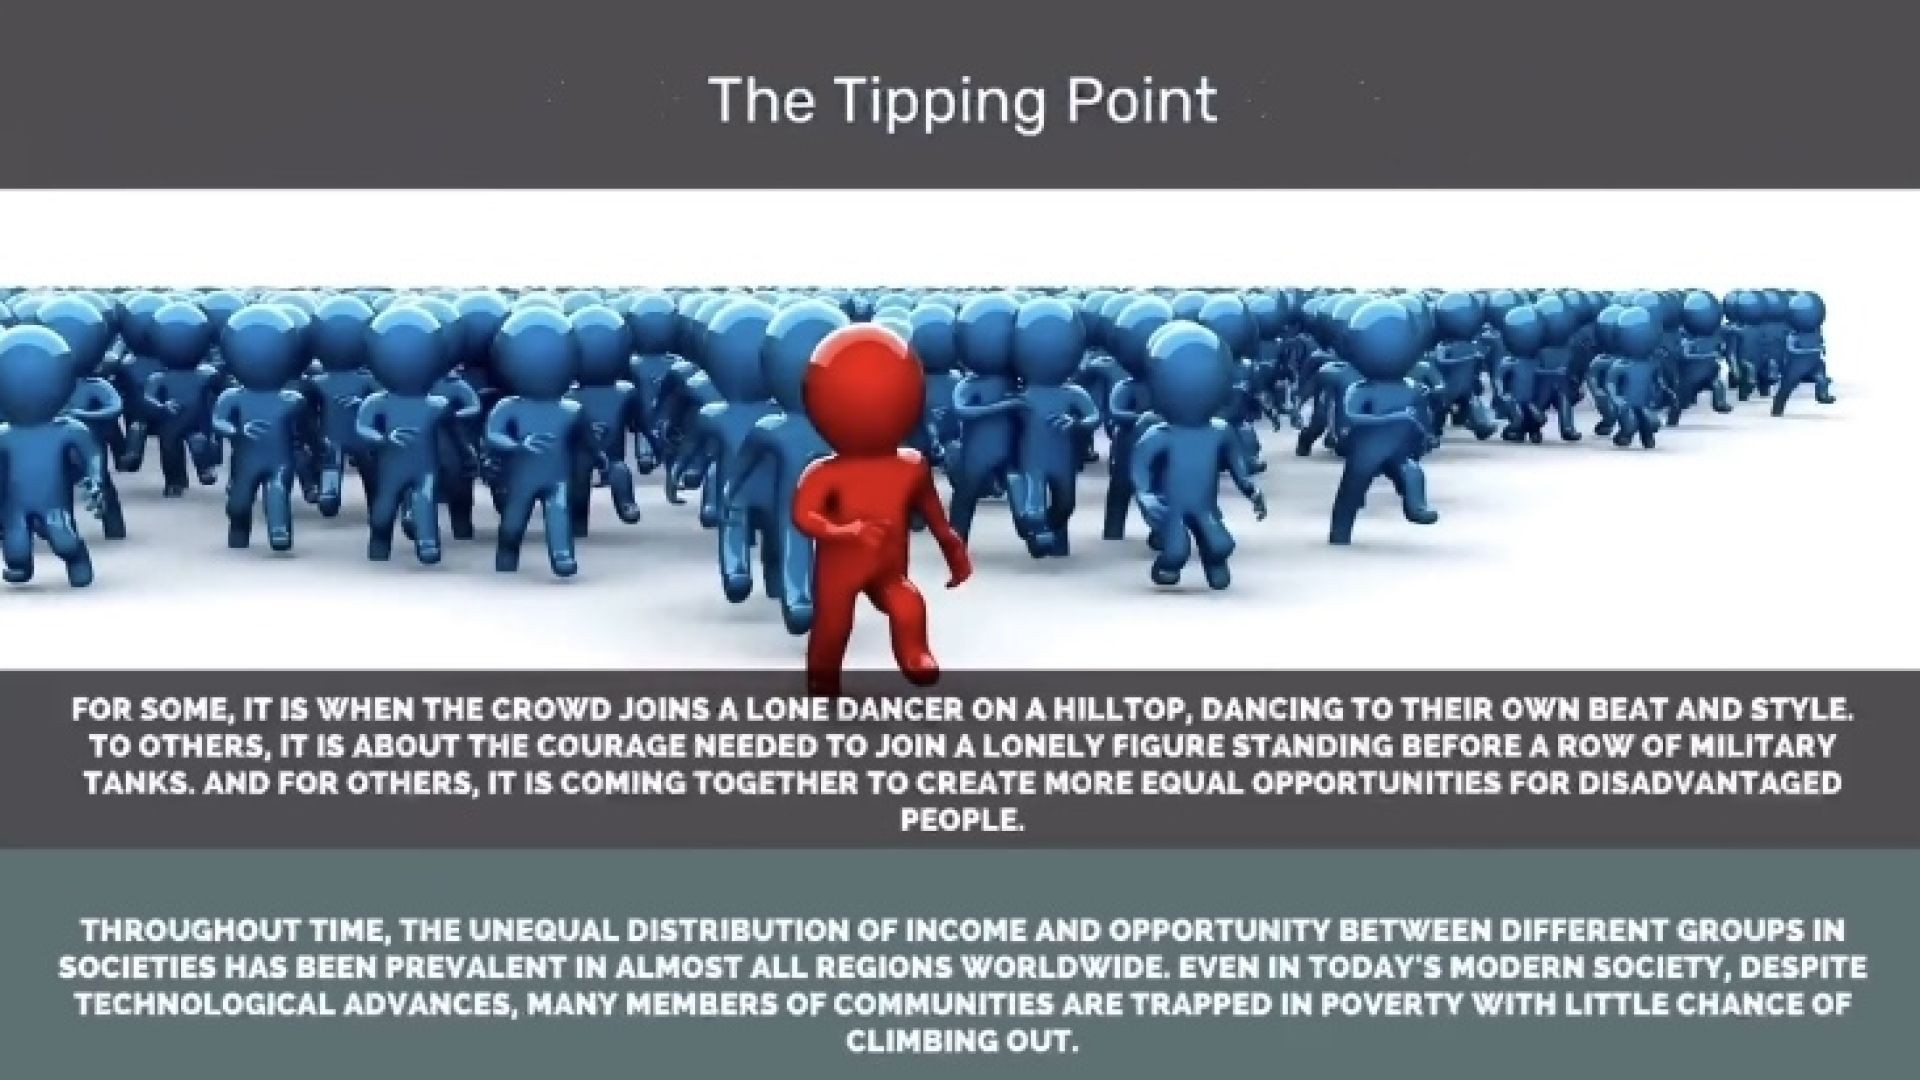 The Tipping Point of CrowdPoints Epic Journey - Video Article Quick View